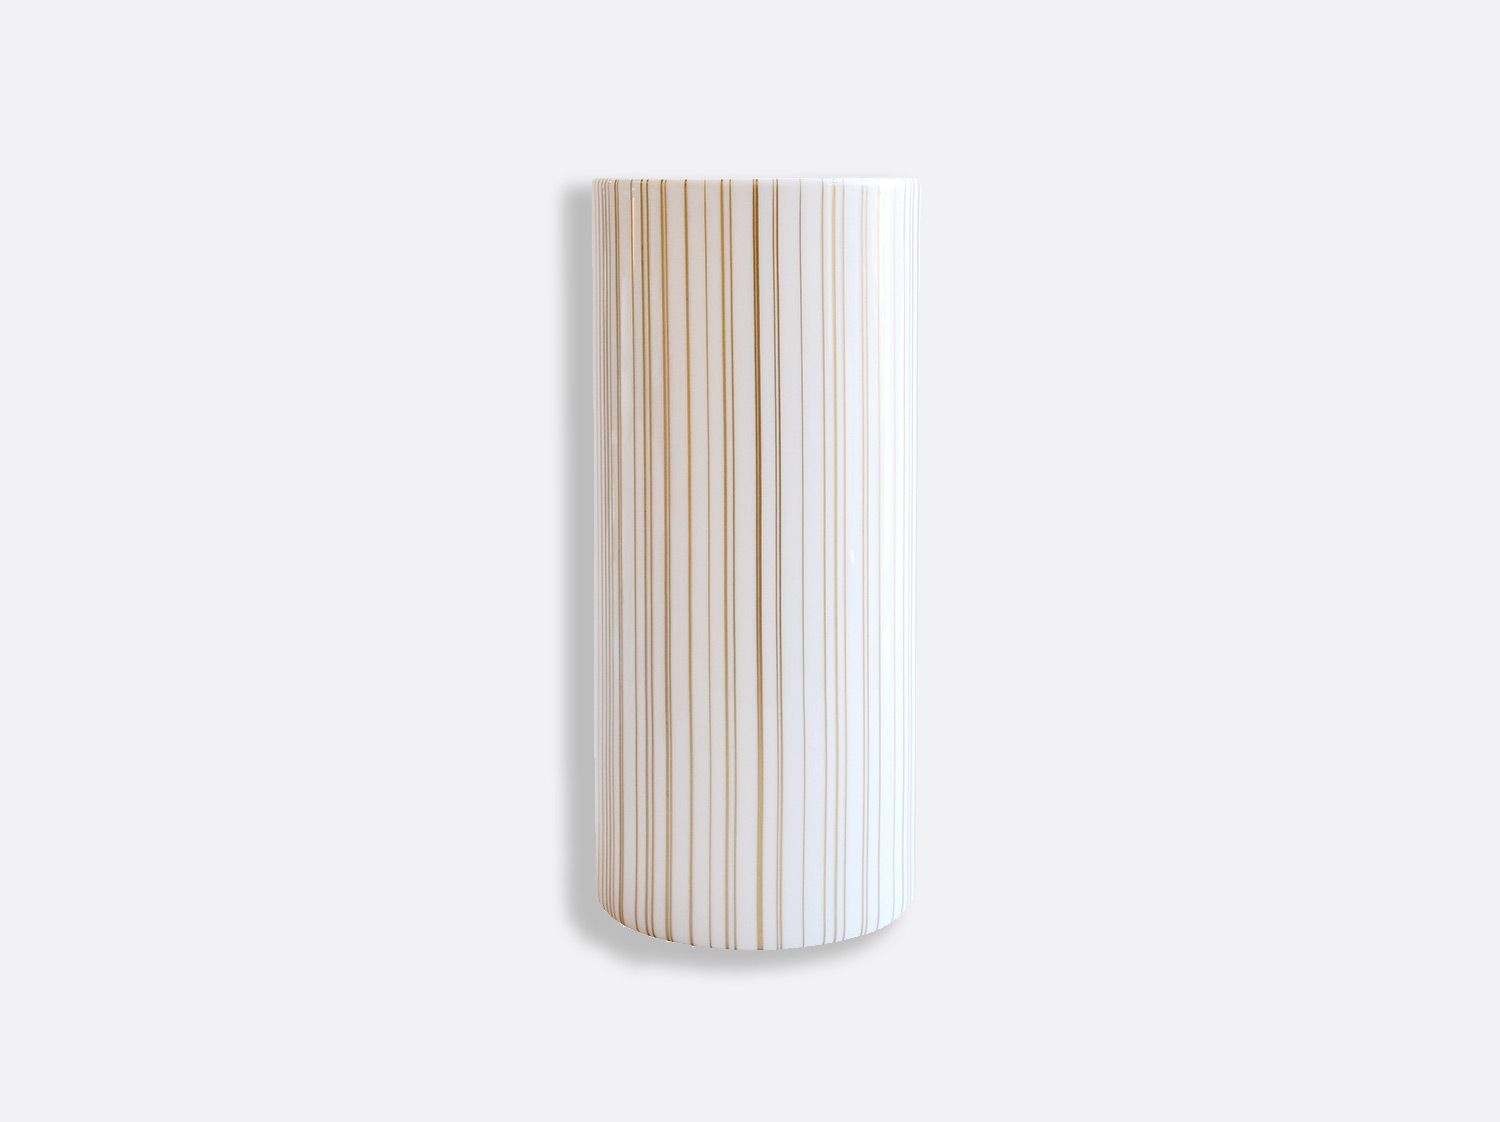 China Tube vase H. 28 cm D. 12 cm of the collection Sol | Bernardaud